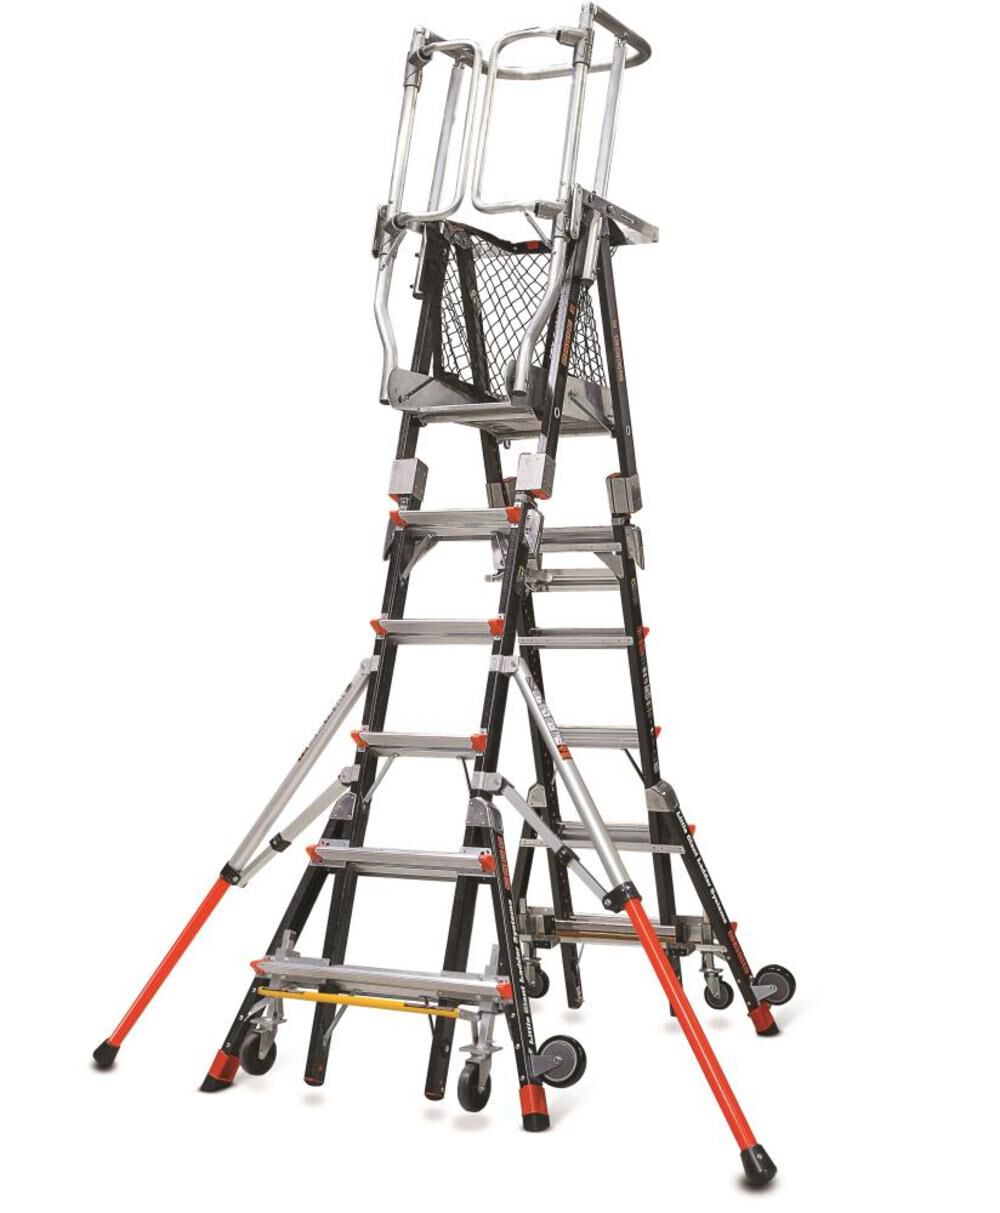 Giant Safety Compact Cage Model 6 Ft. to 10 Ft. IAA FG with Side Tip Outrigger and Wheel Lift 19506-244